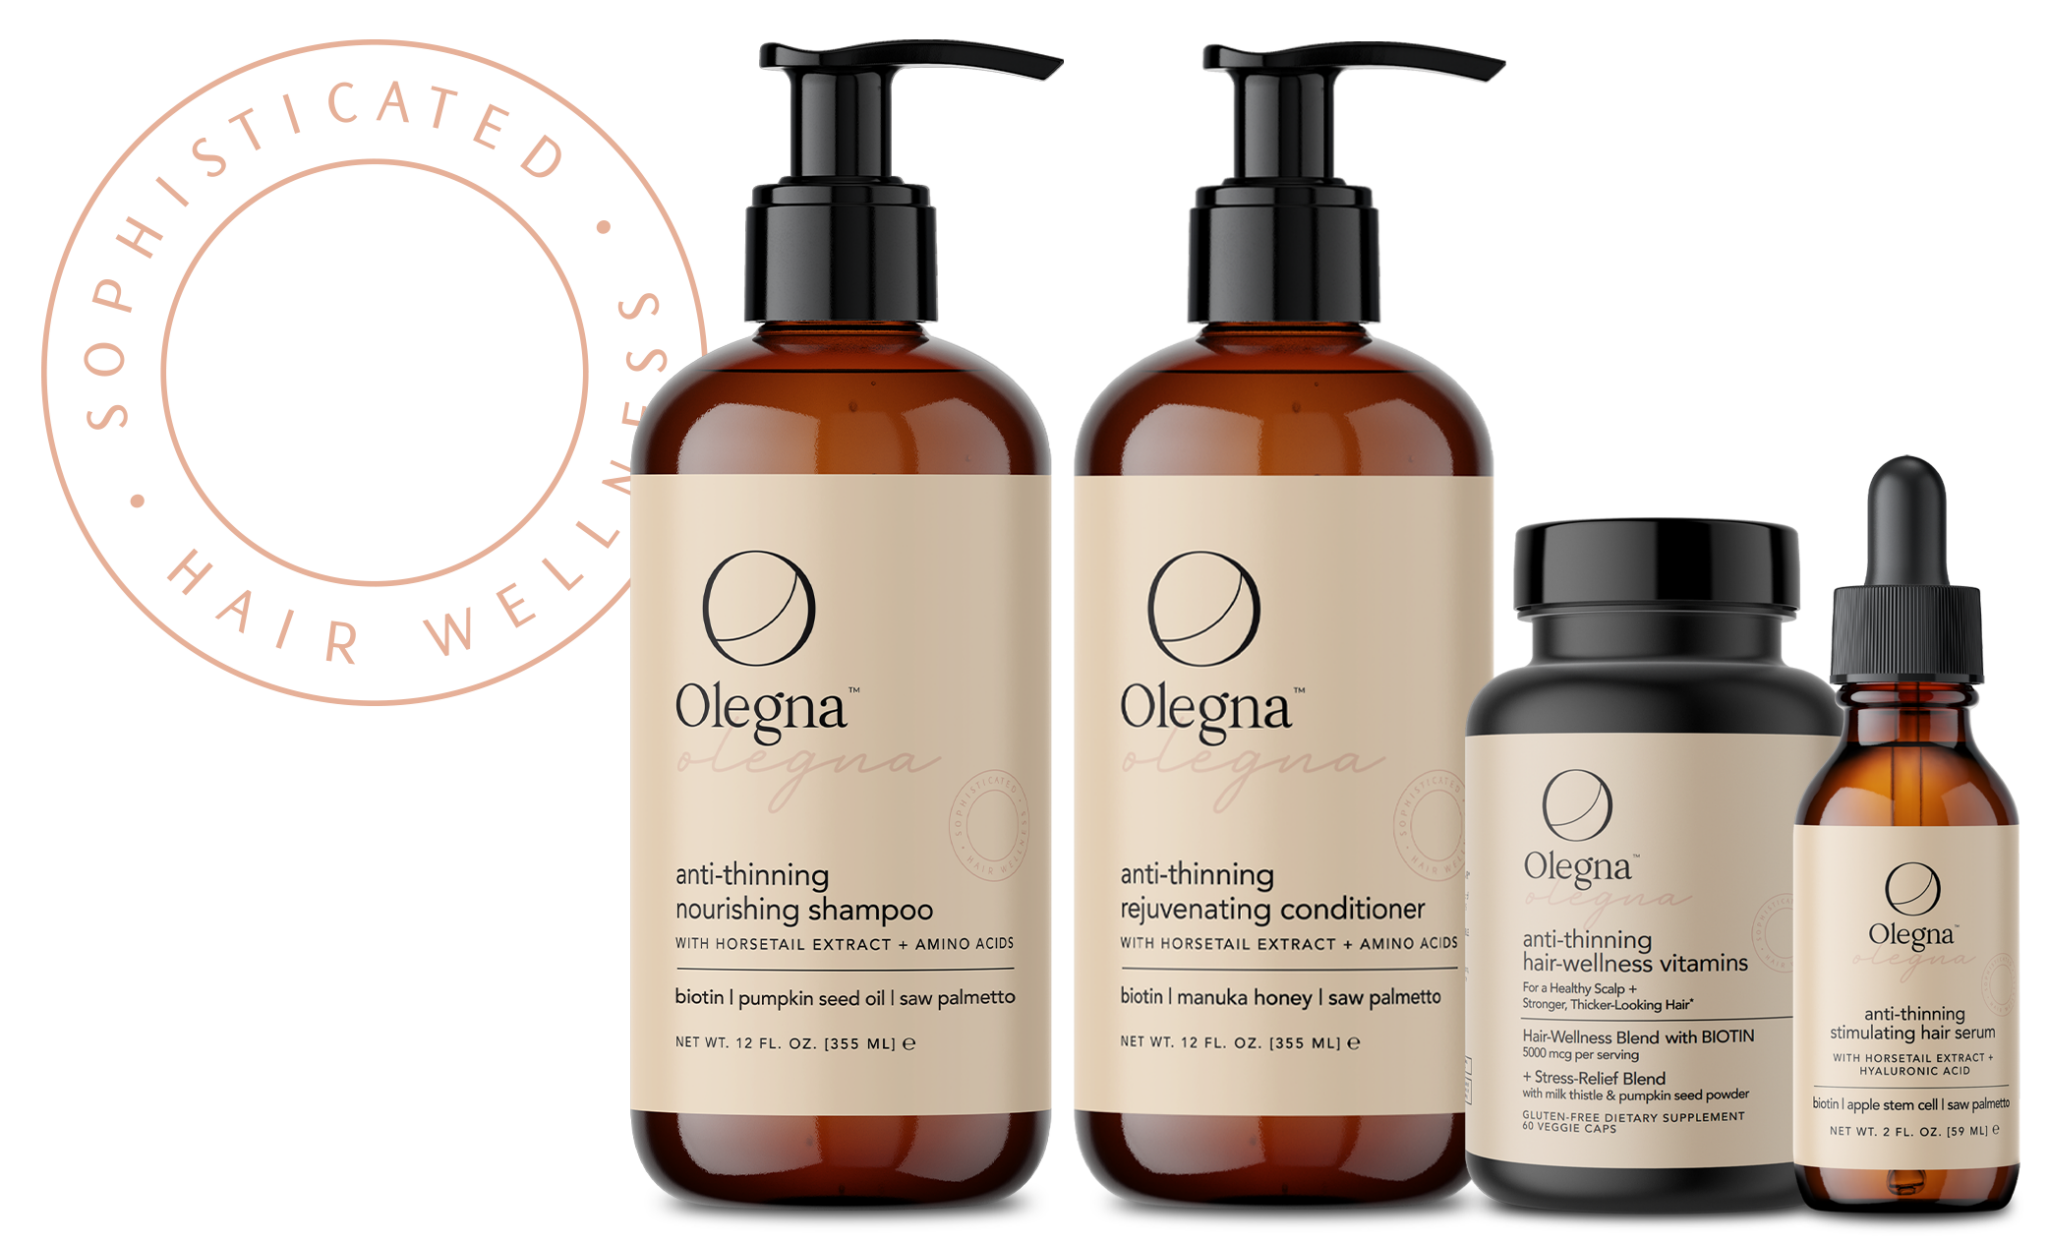 Olegna Anti-Thinning hair care products